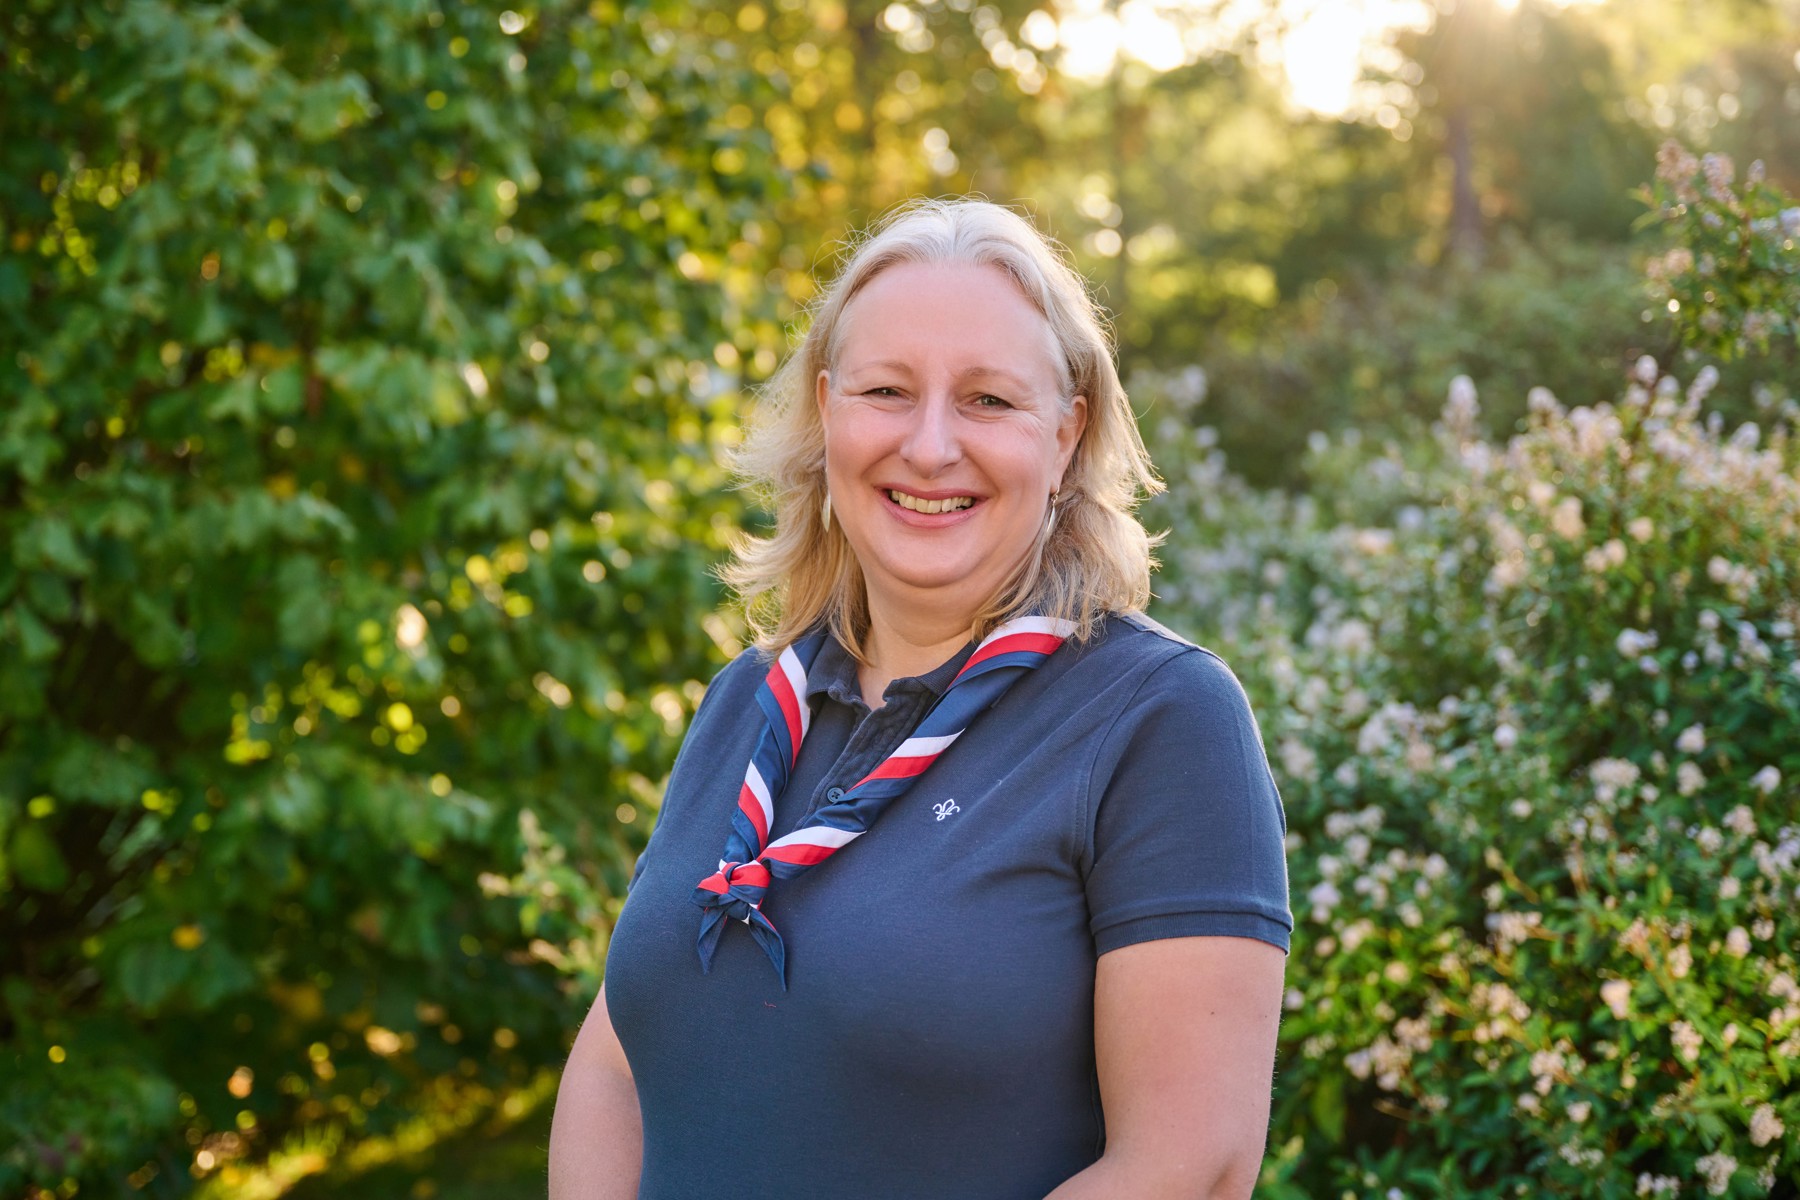 Kate Marks, Scouts Trustee, stands in front of bushes with sunlight behind her. She's smiling at the camera and she's wearing a navy Scouts polo shirt with a red, blue and white necker.